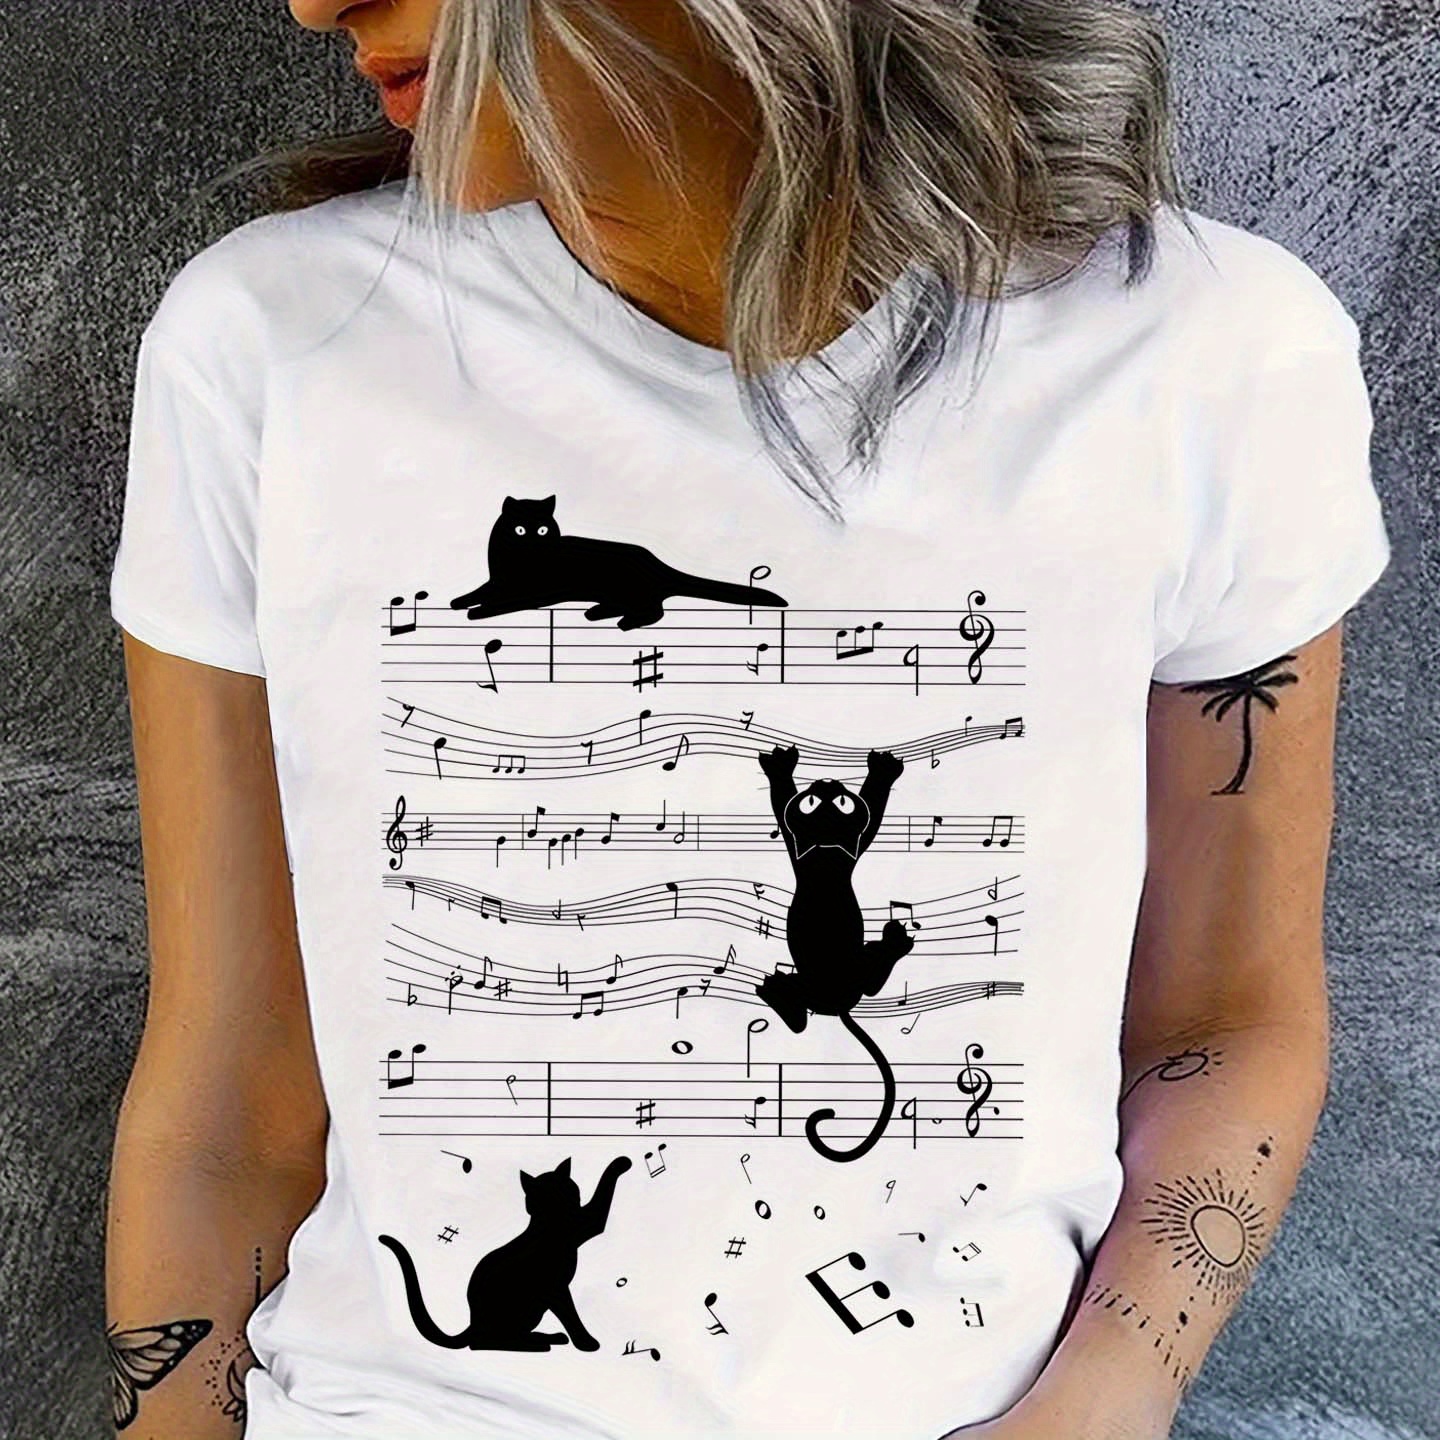 

Cat Print T-shirt, Short Sleeve Crew Neck Casual Top For Summer & Spring, Women's Clothing